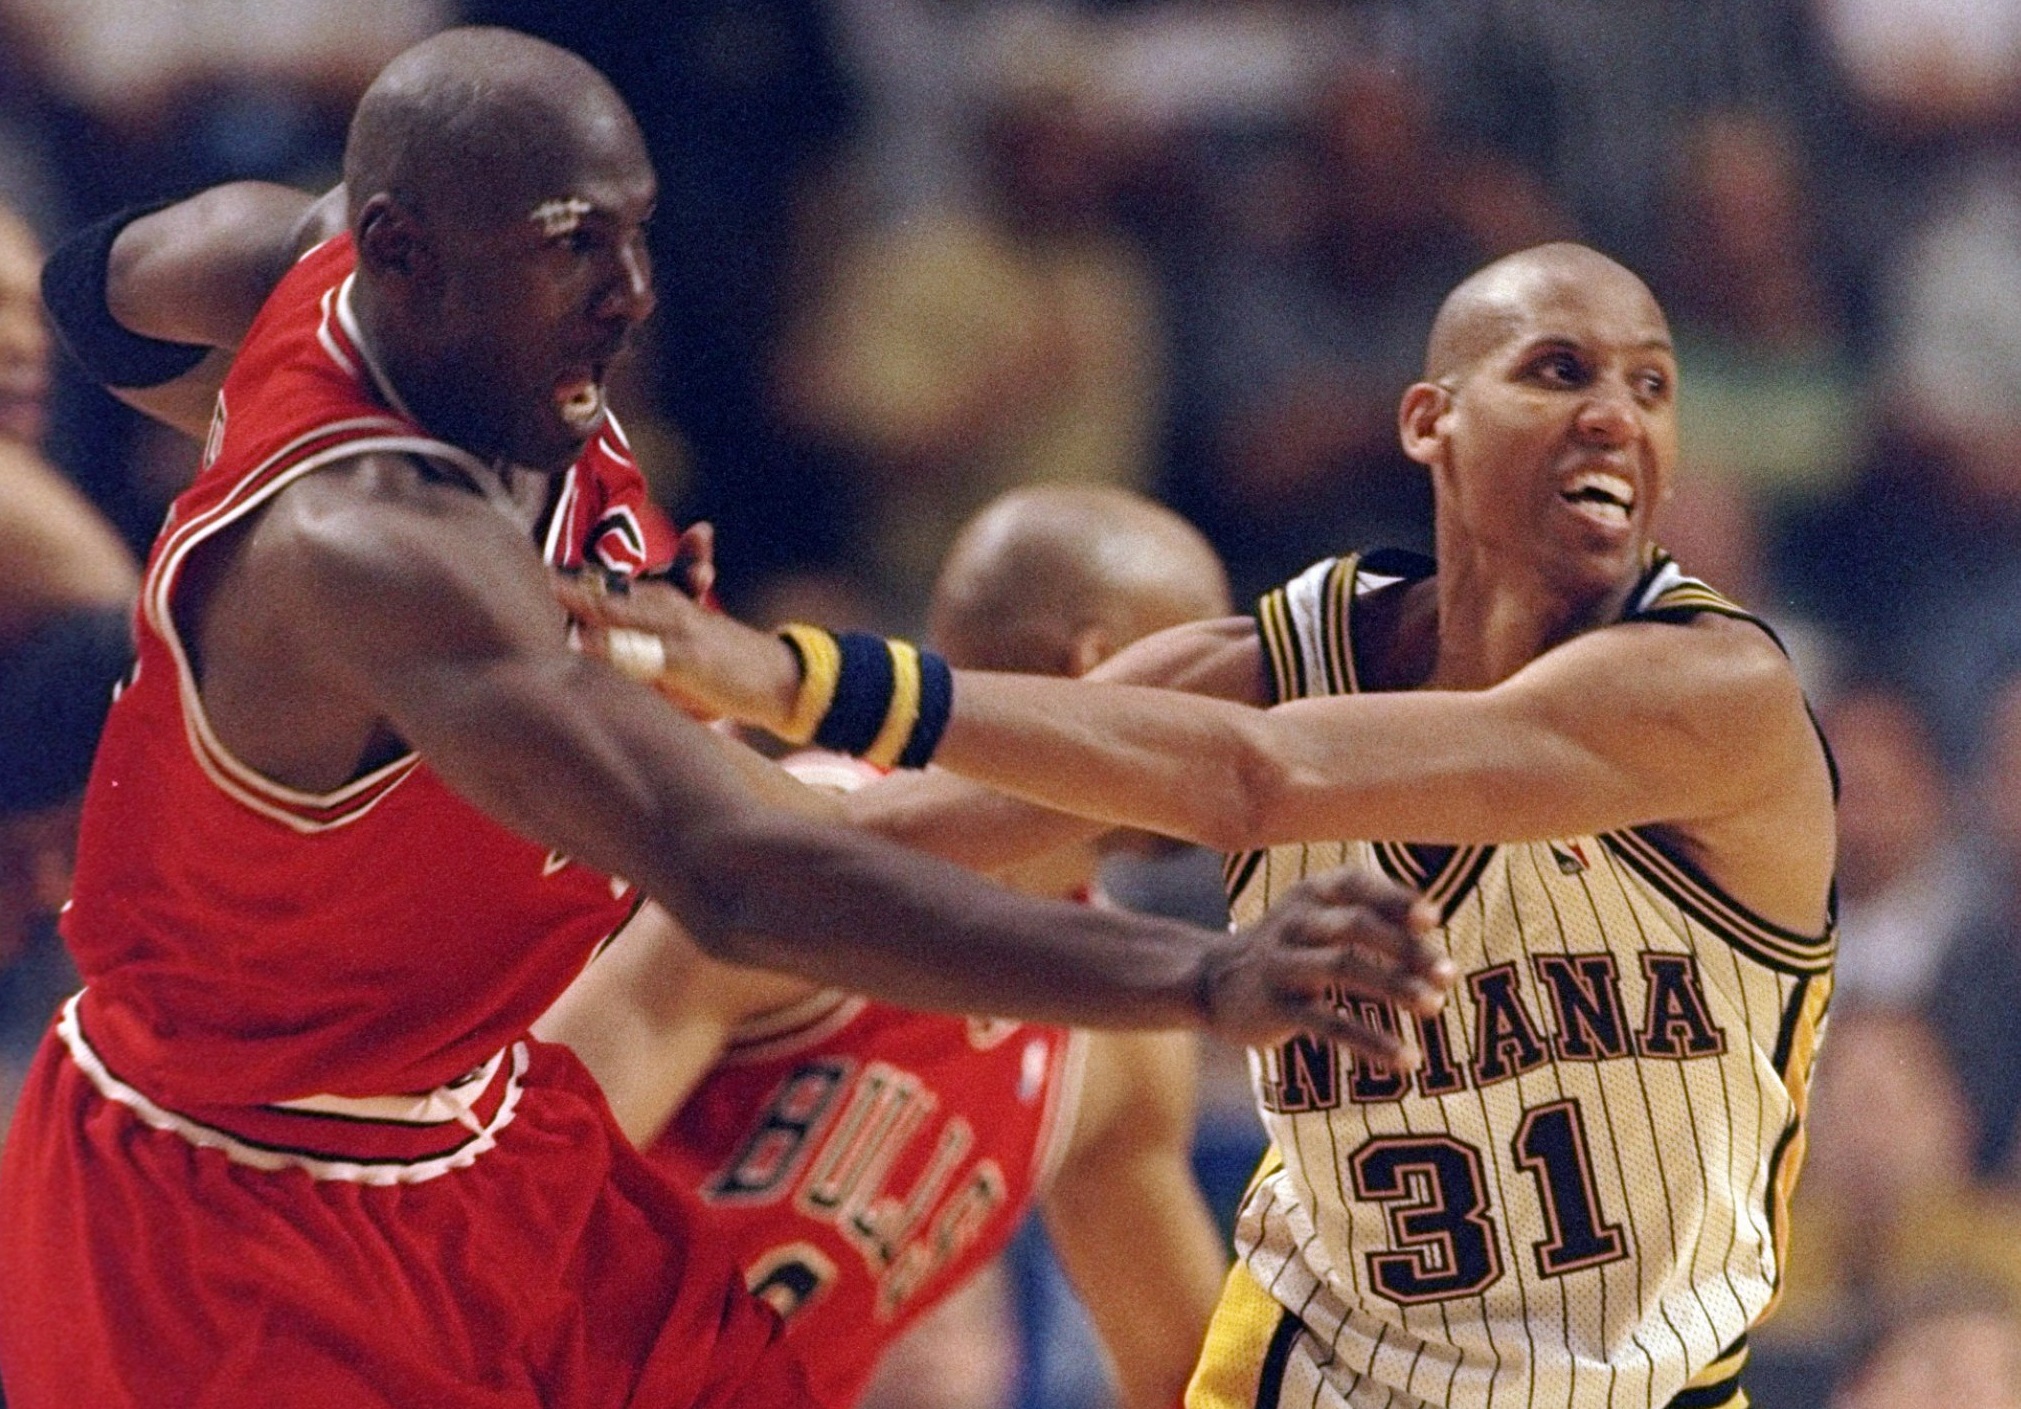 Relive the Pacers vs. Bulls 1998 Eastern Conference Finals